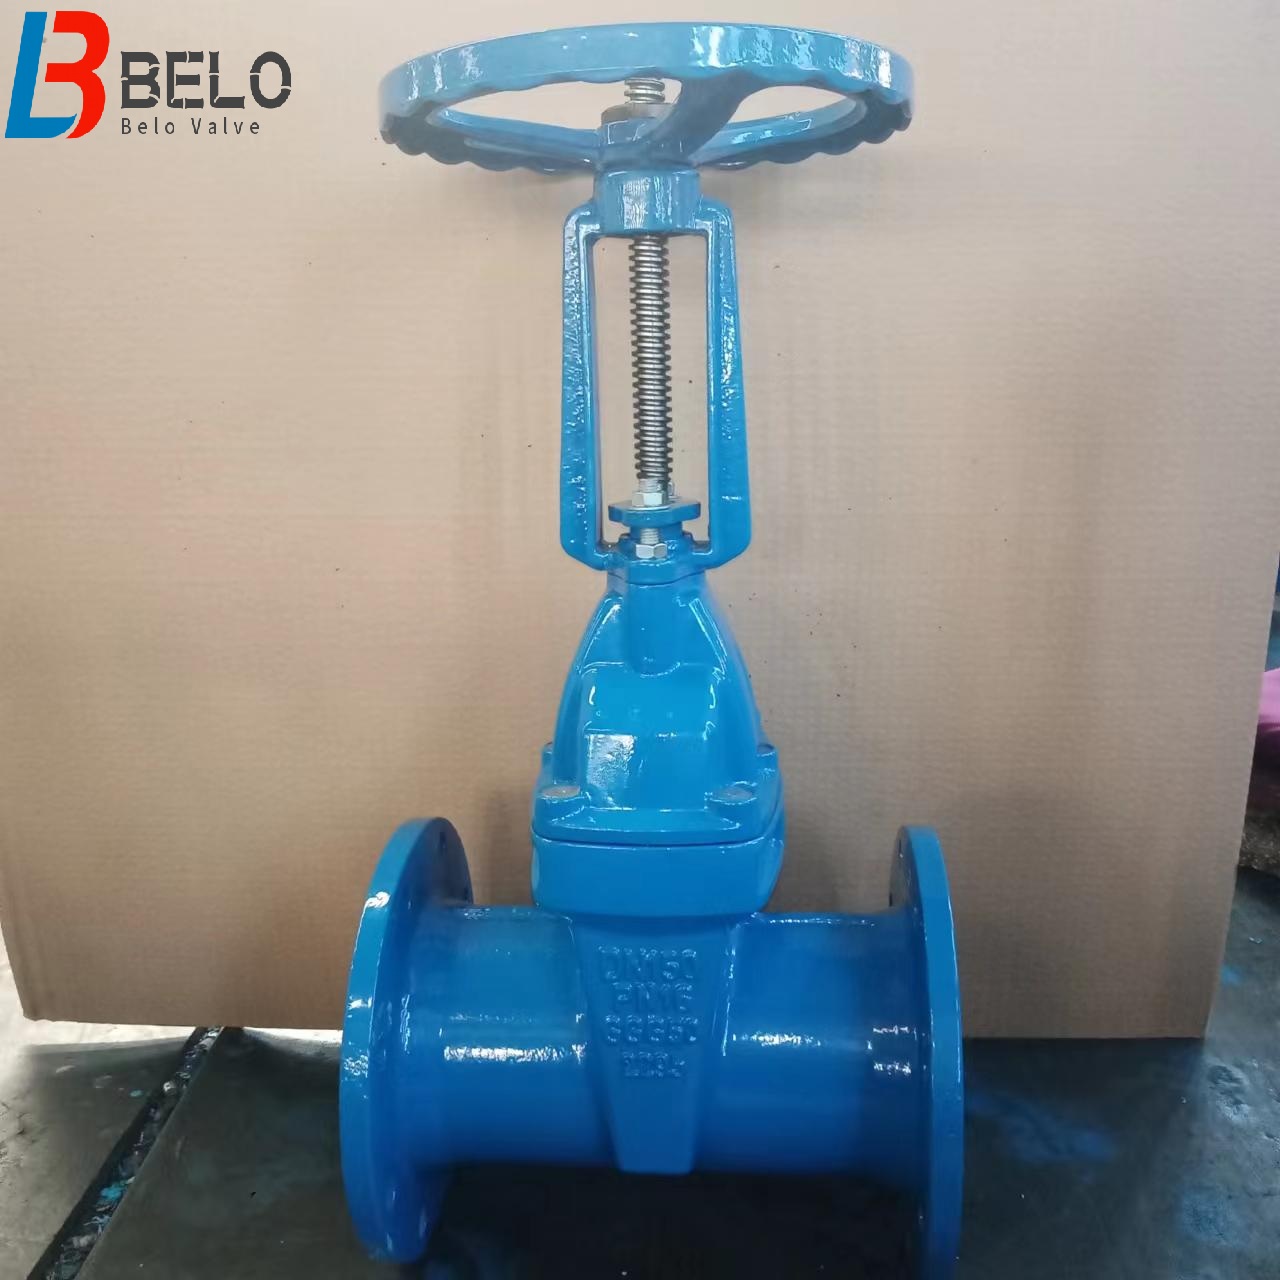 DIN3352F5 resilient seated soft sealing rising stem gate valve-DN150-PN16